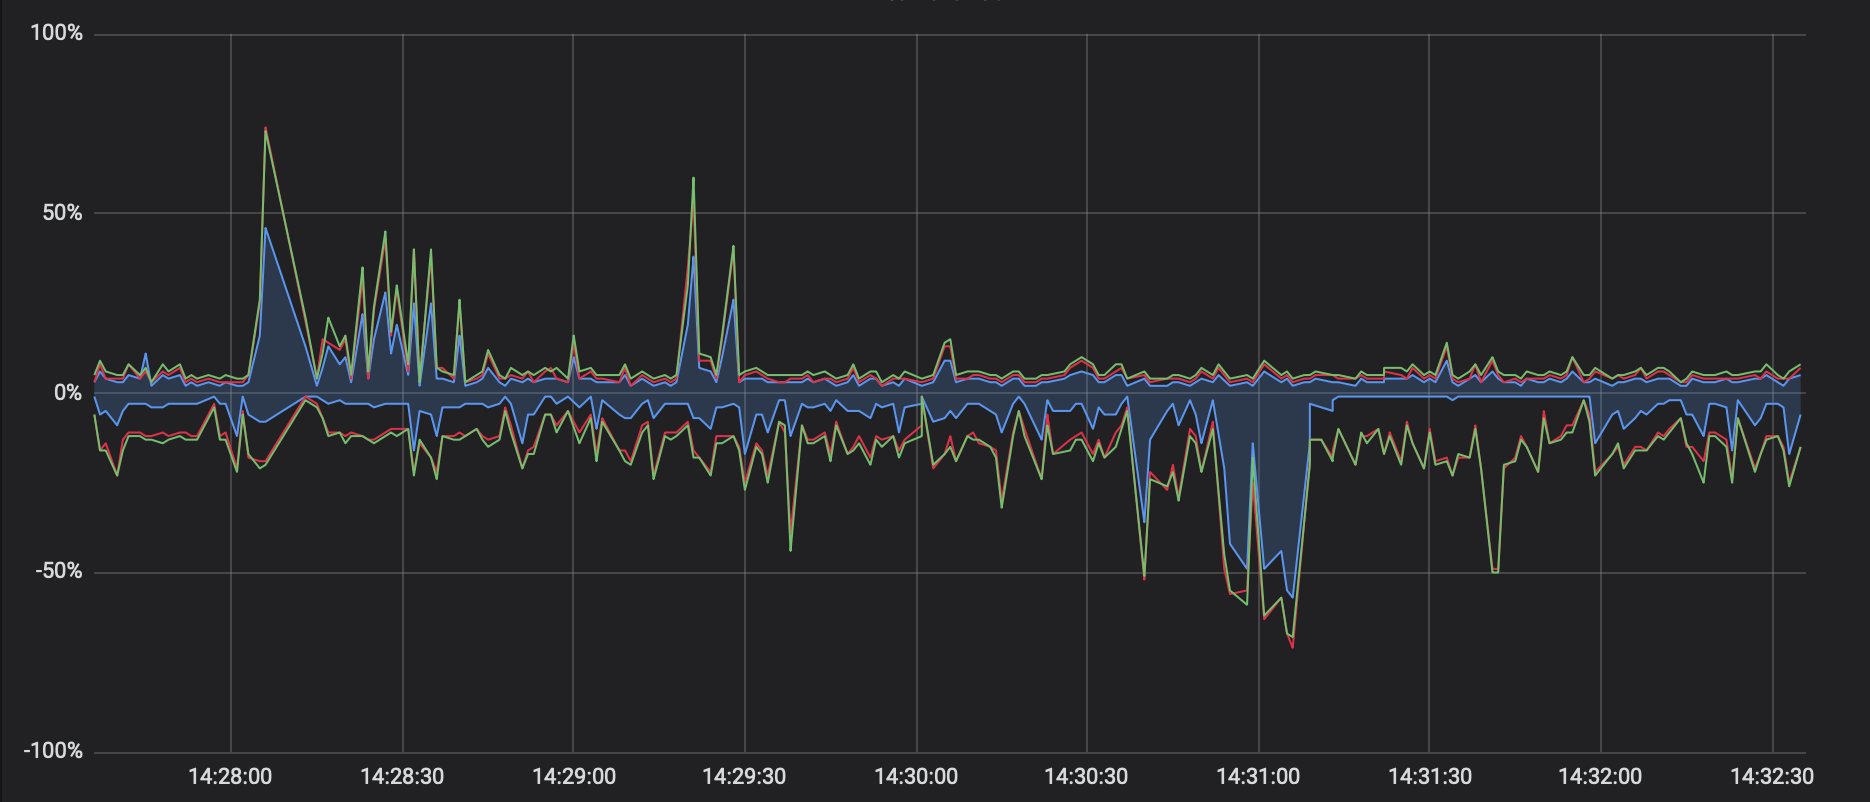 Grafana showing WiFi channel interference and utilisation